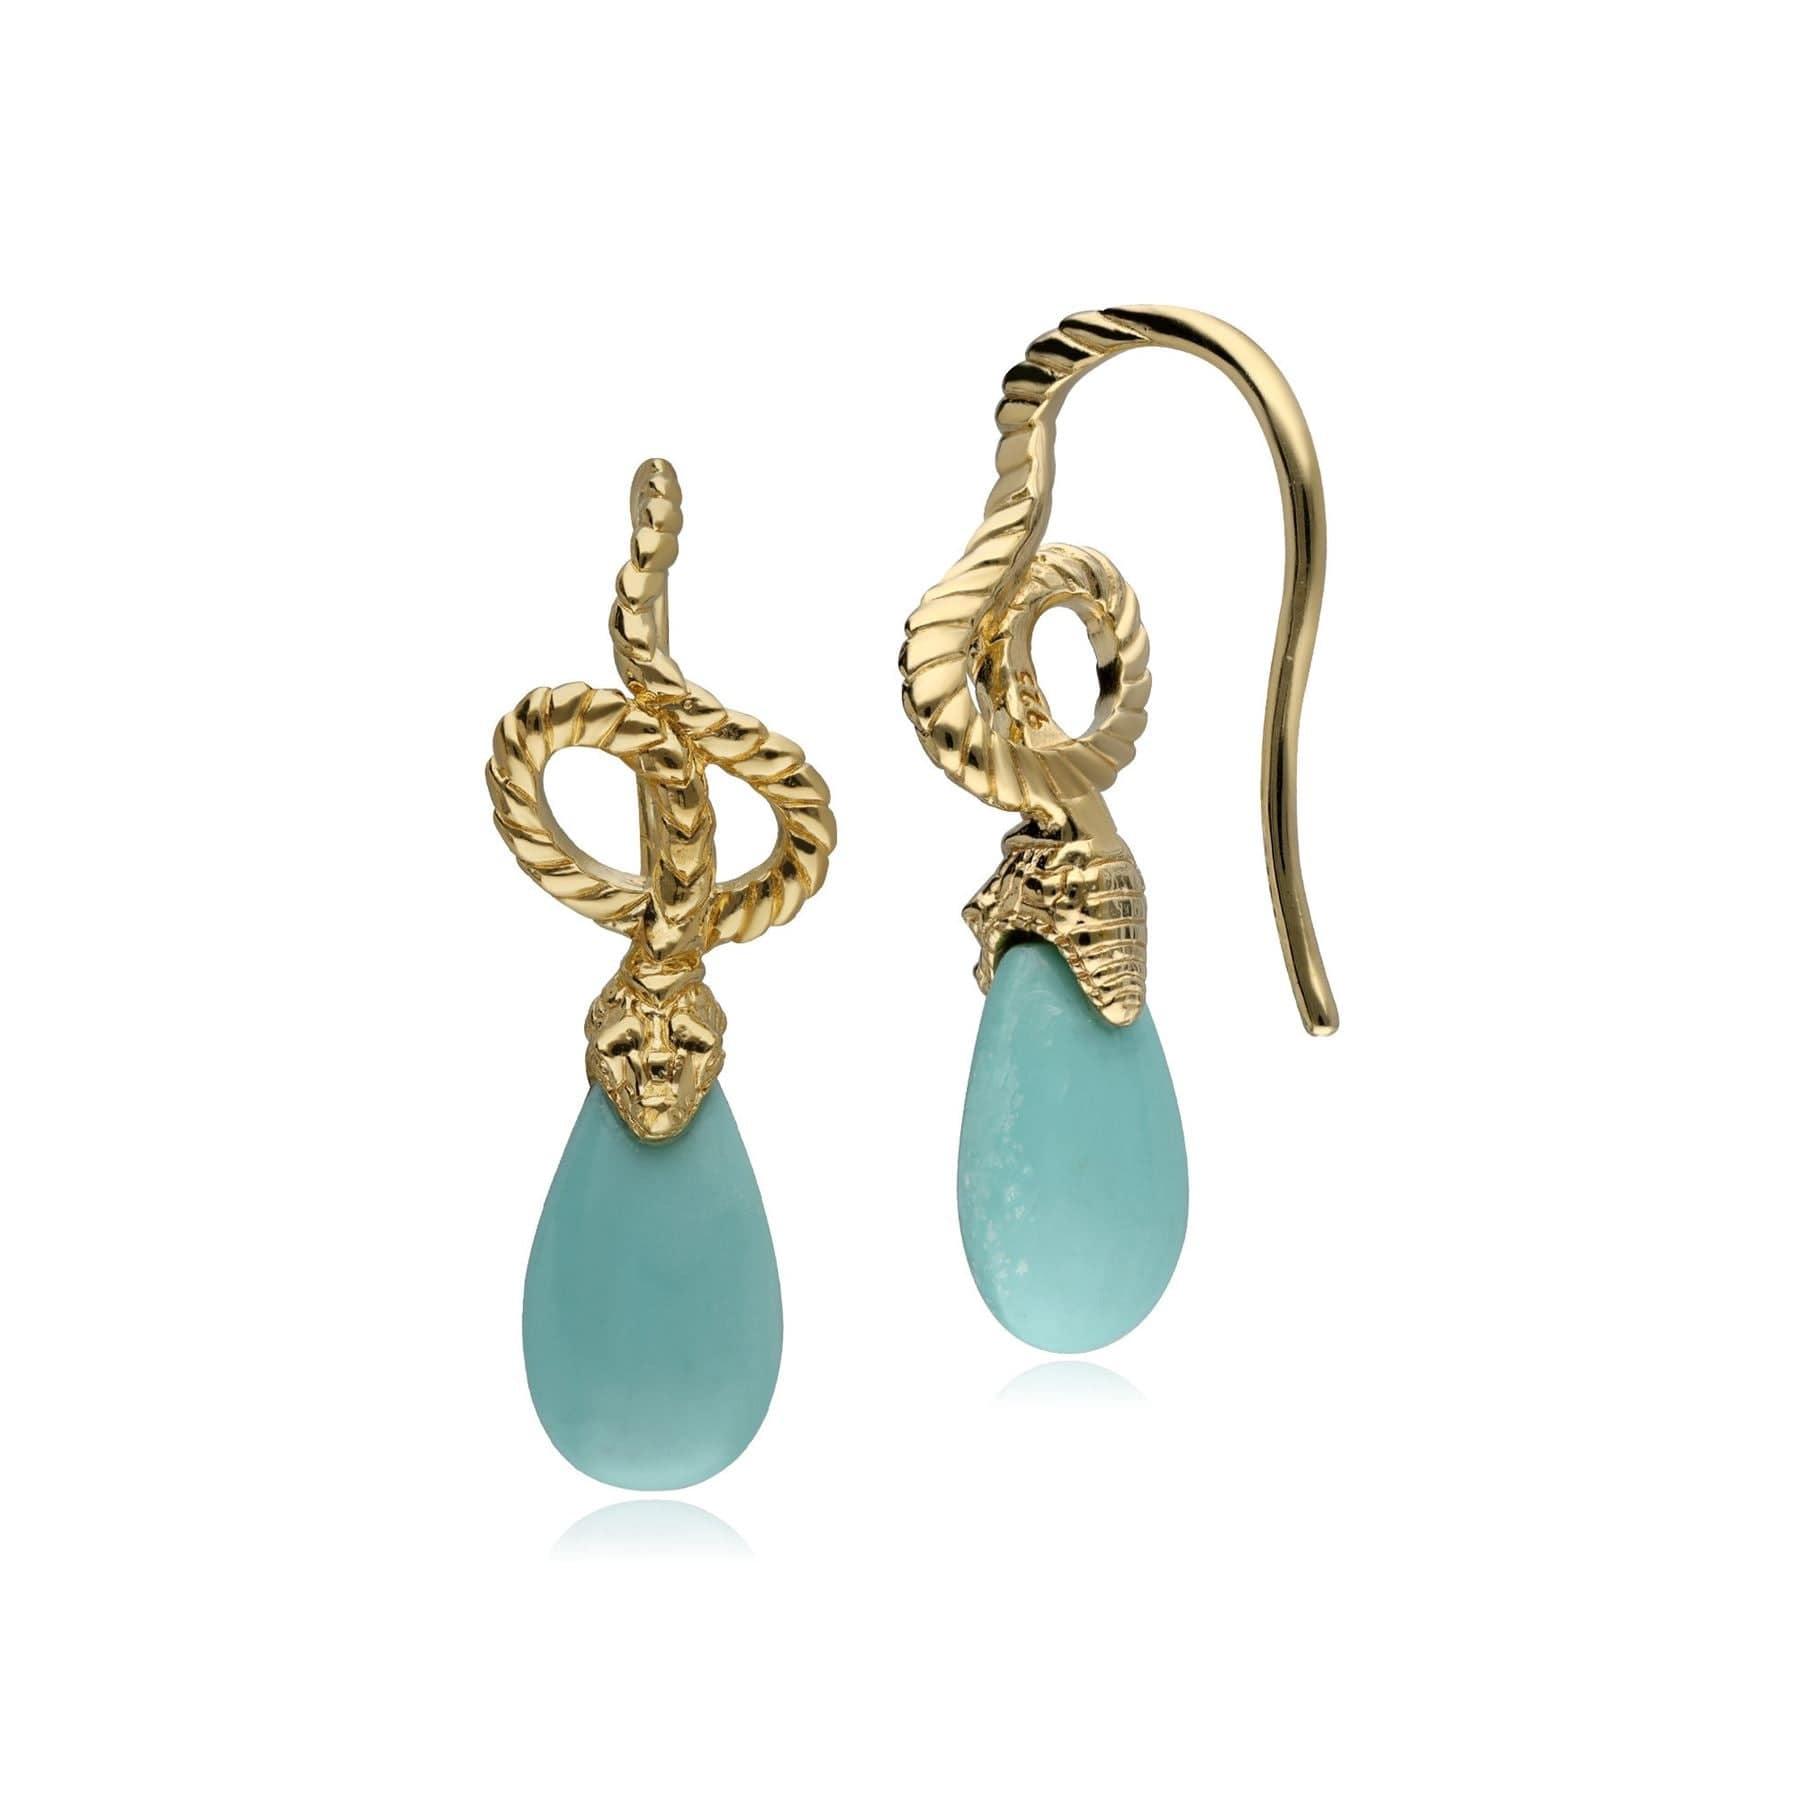 ECFEW™ 'The Ruler' Turquoise Winding Snake Drop Earrings in Gold Plated Sterling Silver